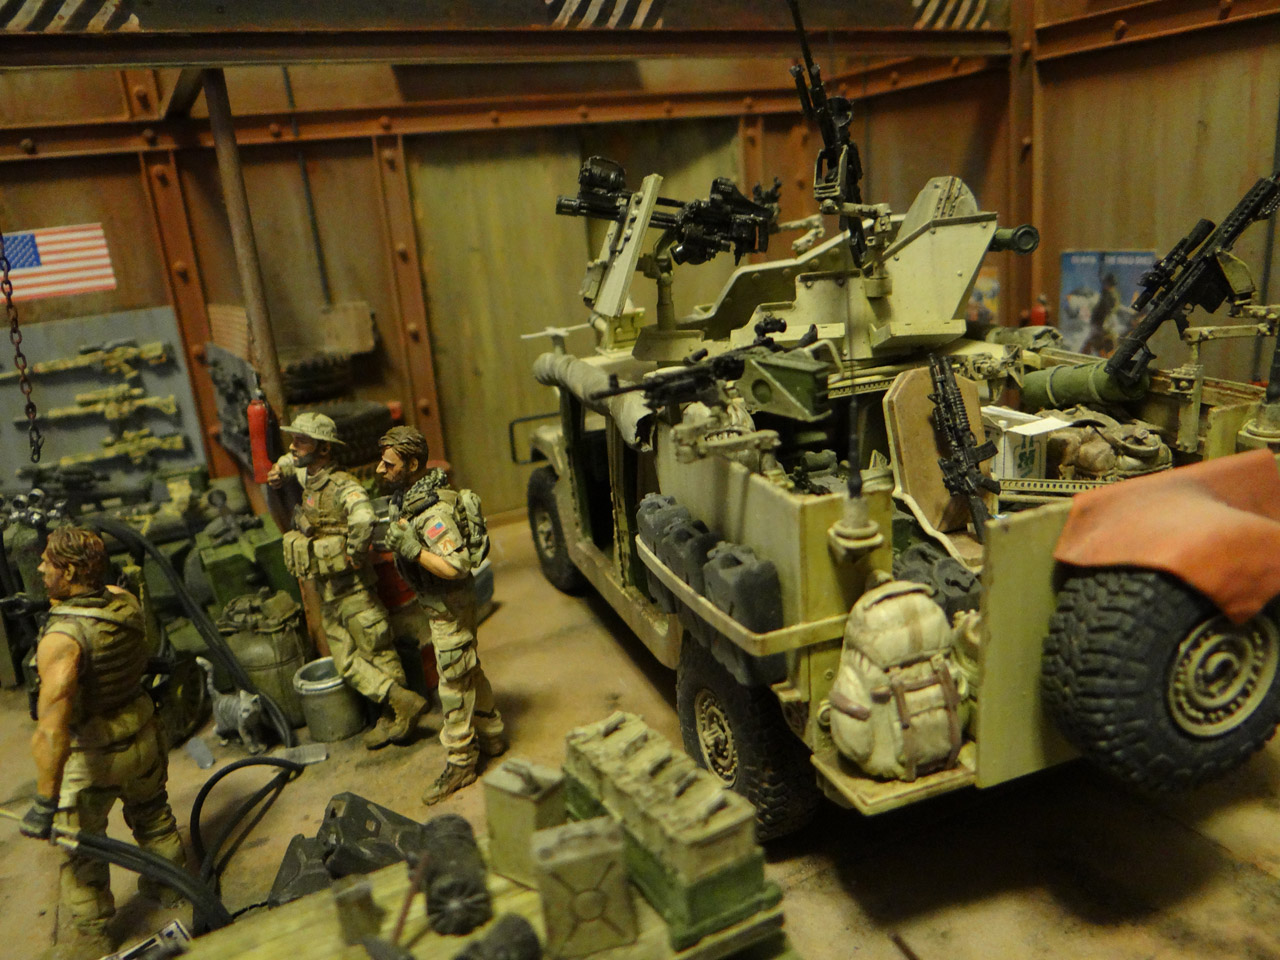 Dioramas and Vignettes: Enforcement to democracy, photo #13